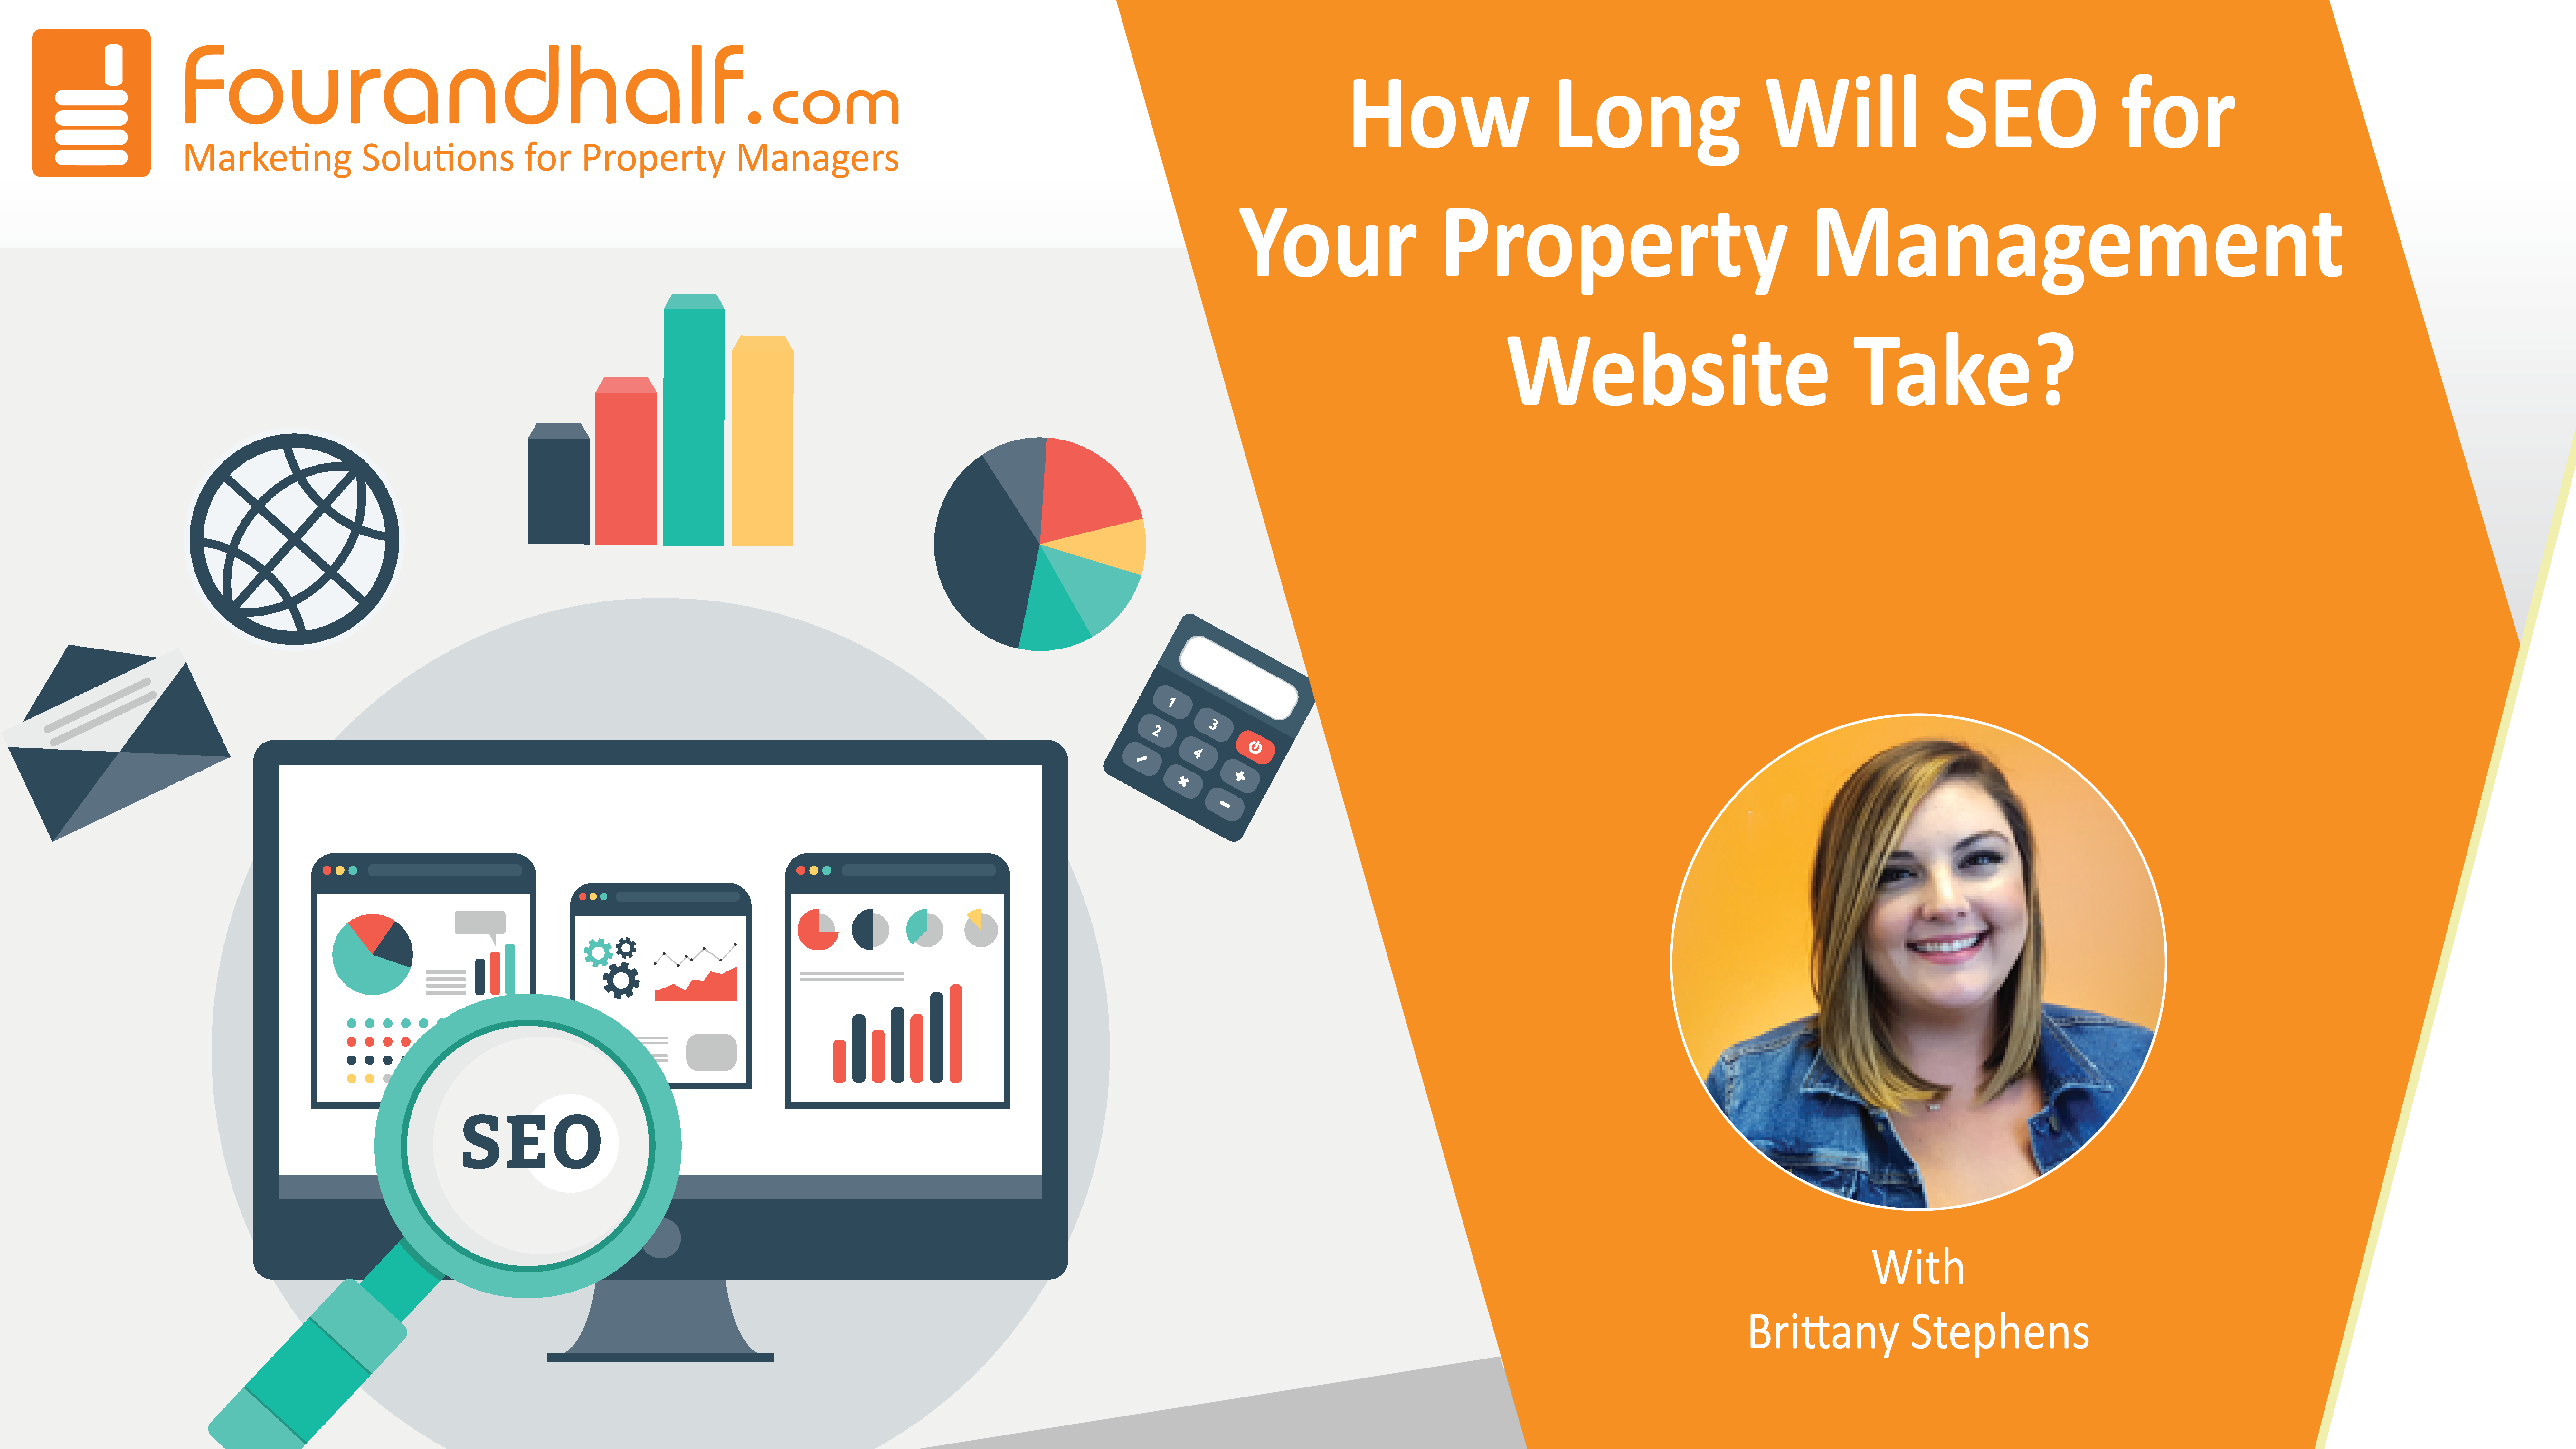 How Long Will SEO for Your Property Management Website Take?